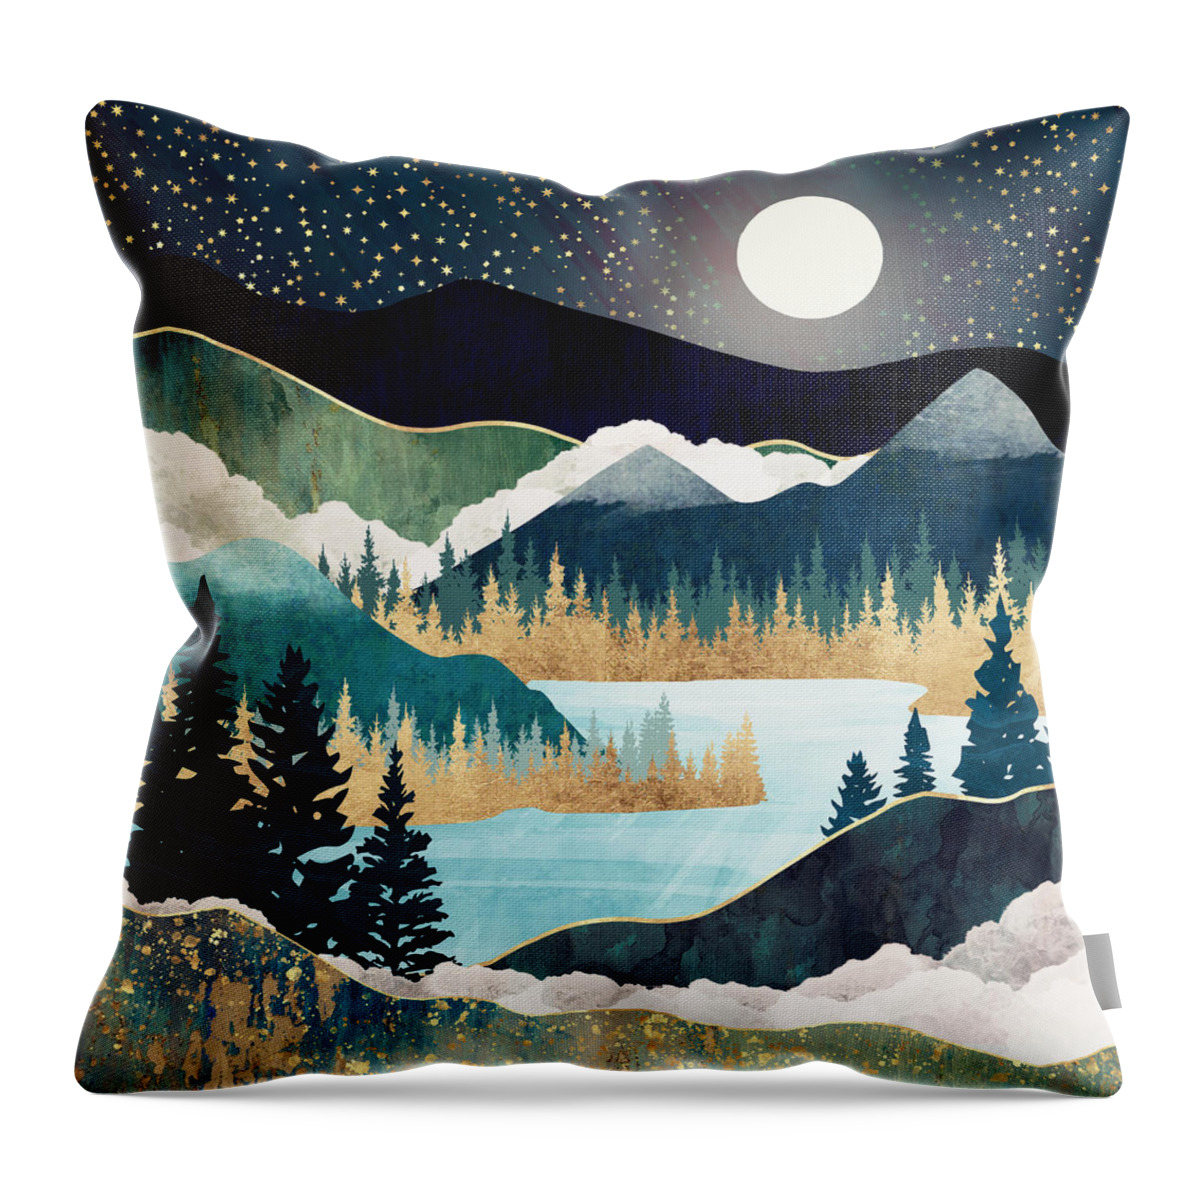 Stars Throw Pillow featuring the digital art Star Lake by Spacefrog Designs